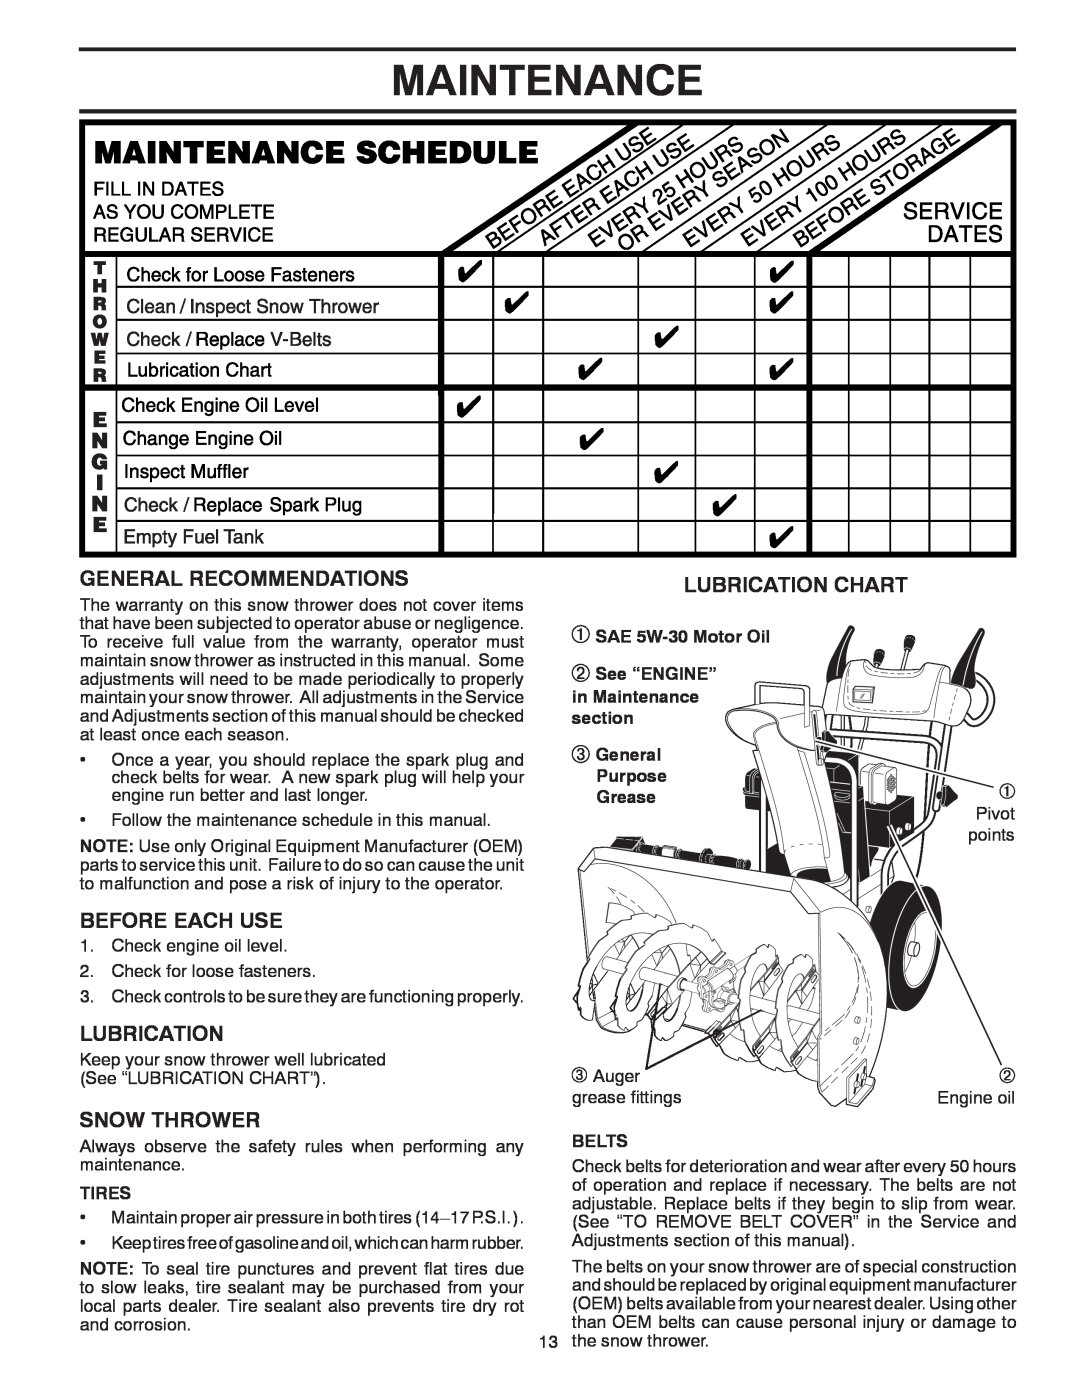 Poulan 96192004501 Maintenance, General Recommendations, Before Each Use, Snow Thrower, Lubrication Chart, Tires 